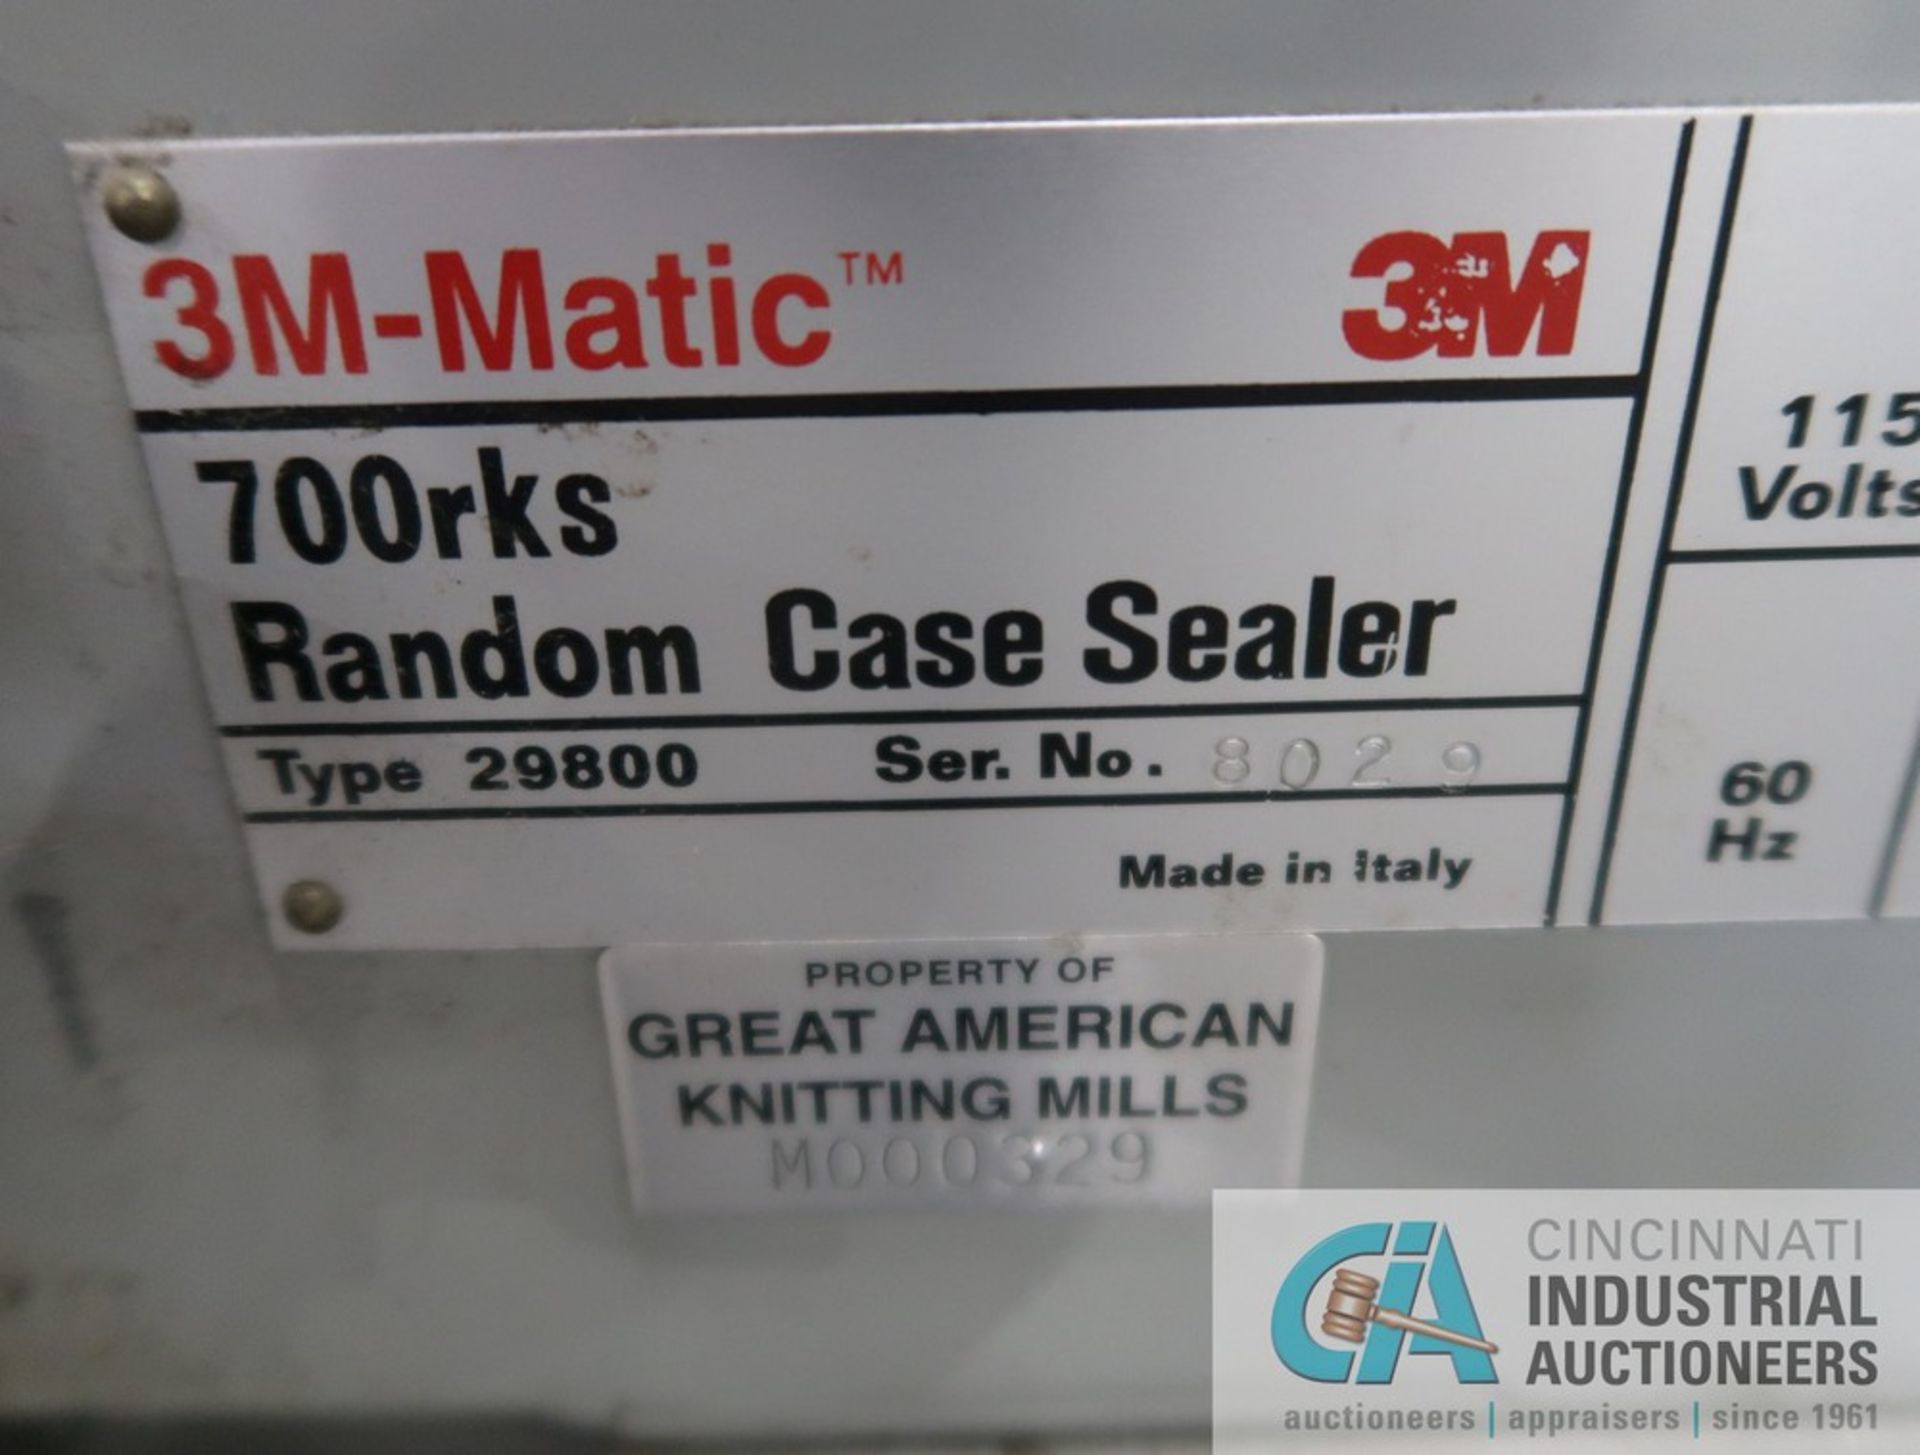 3M-MATIC MODEL 700 RKS TYPE 40800 RANDOM CASE SEALER WITH ACCUGLIDE 3 TAPING HEADS; S/N 8029 - Image 8 of 8